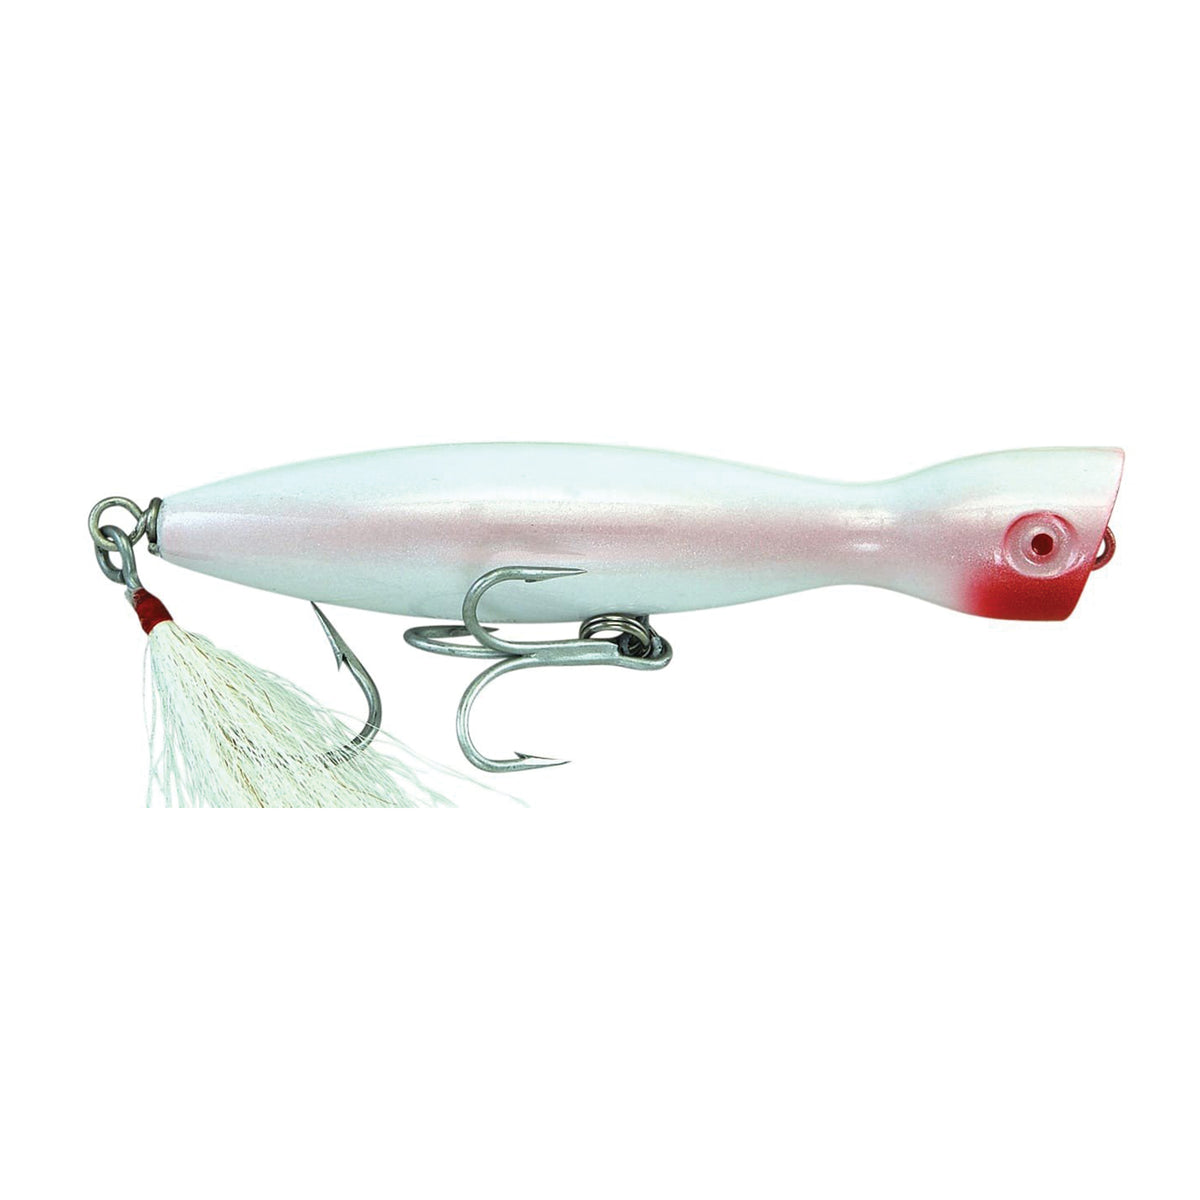 OSP High Cut DR Suspend Shad Rattle Minnow Lure H-09 (7867)